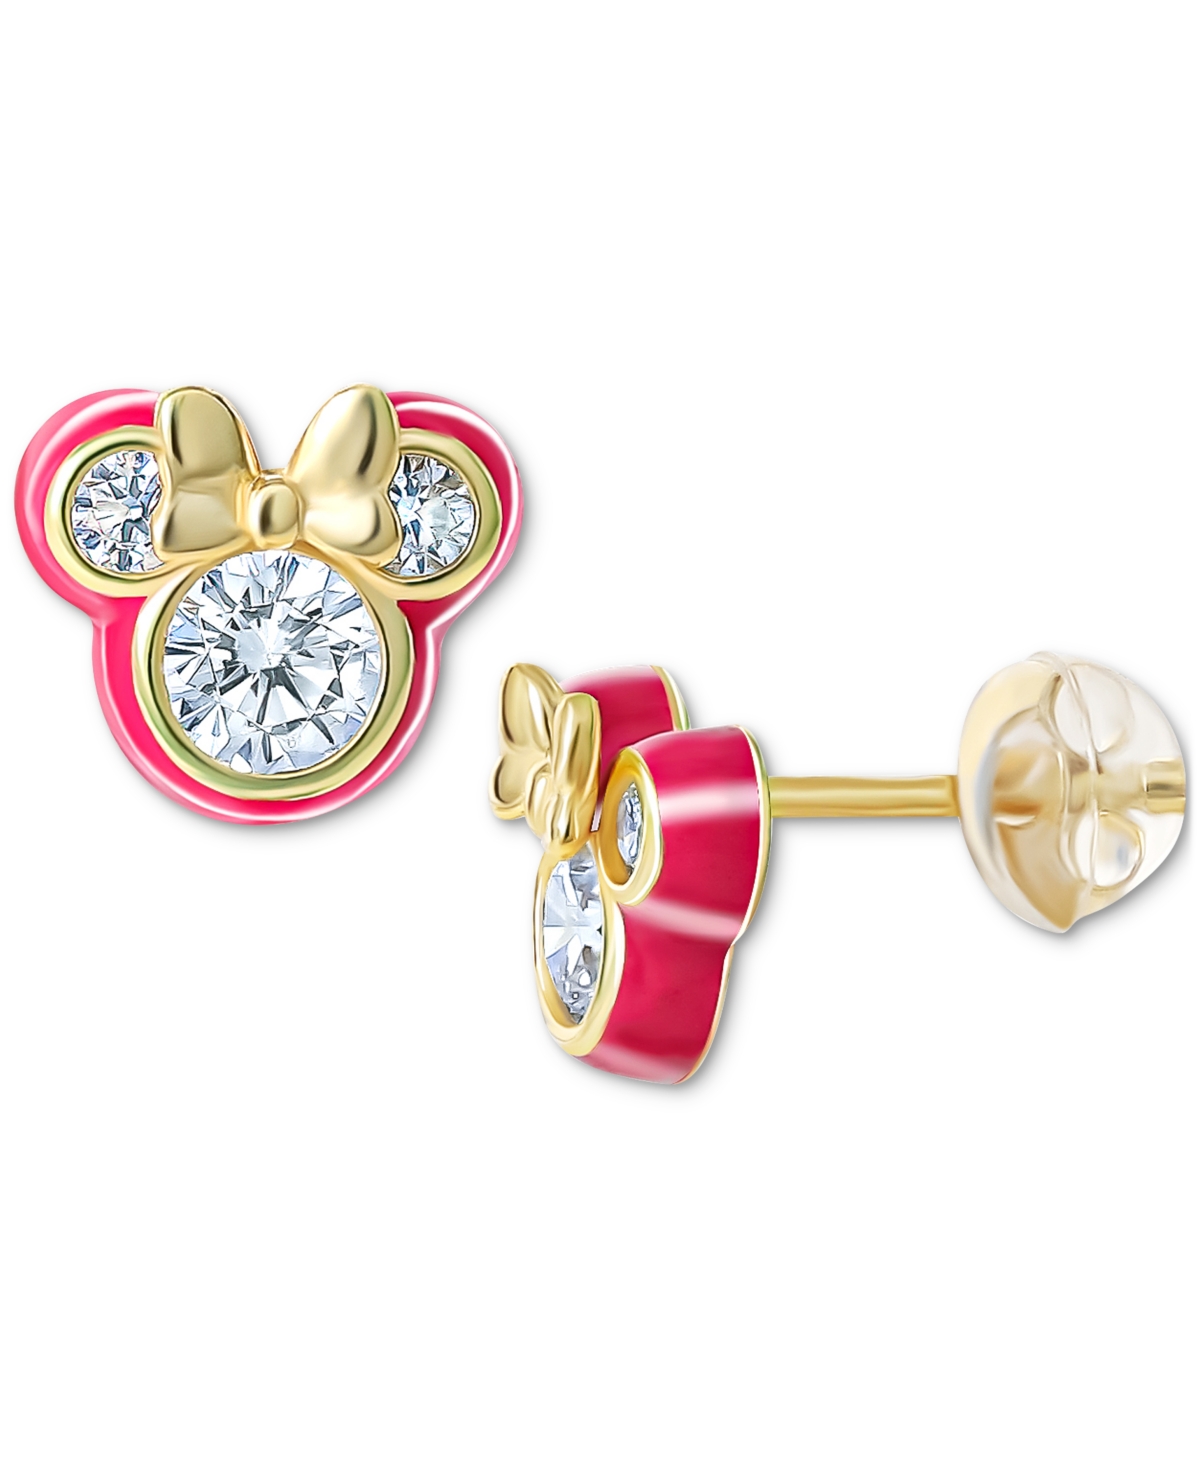 Cubic Zirconia & Deep Pink Enamel Minnie Mouse Stud Earrings in 18k Gold-Plated Sterling Silver - Gold Over Silver